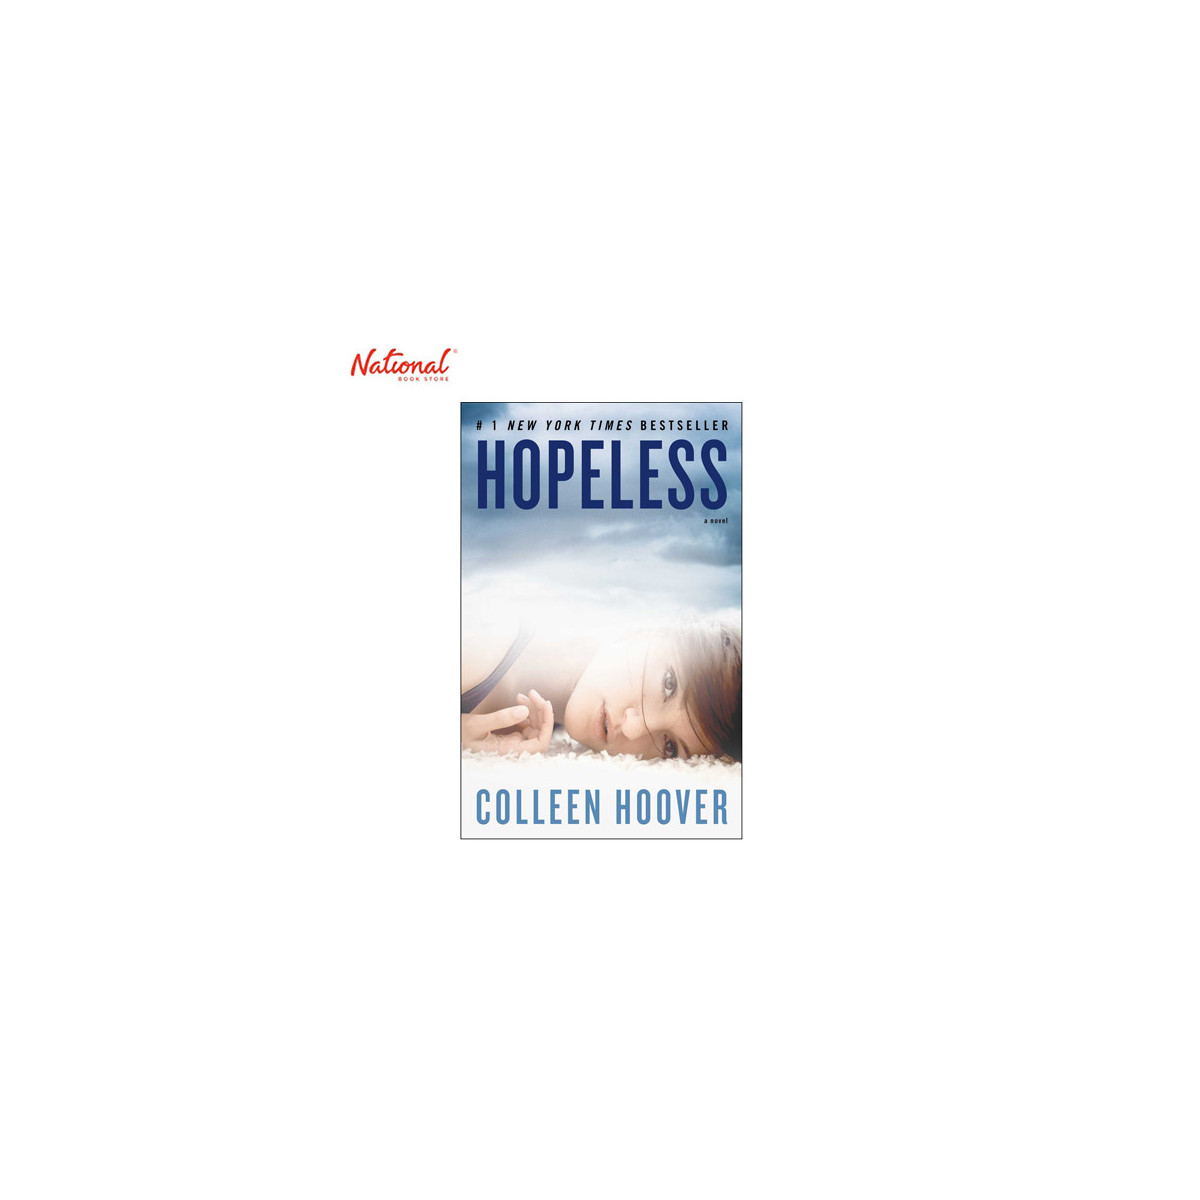 Hopeless Trade Paperback by Colleen Hoover